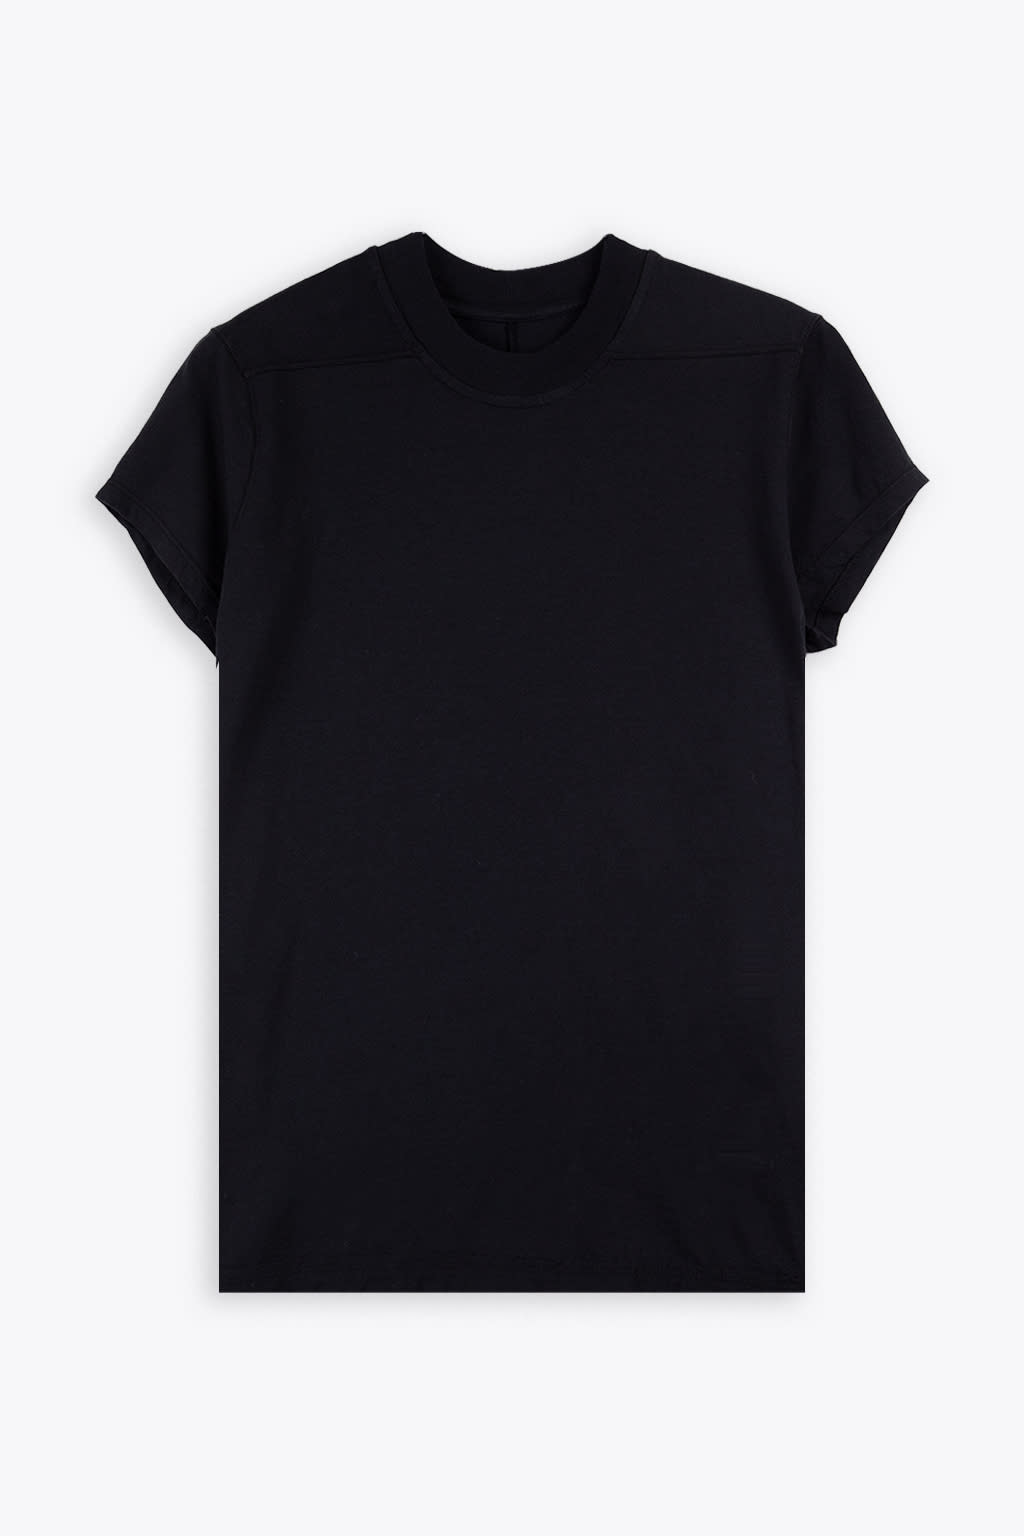 Drkshdw Small Level T Black Cotton Cropped T-shirt - Small Level Tee In Nero